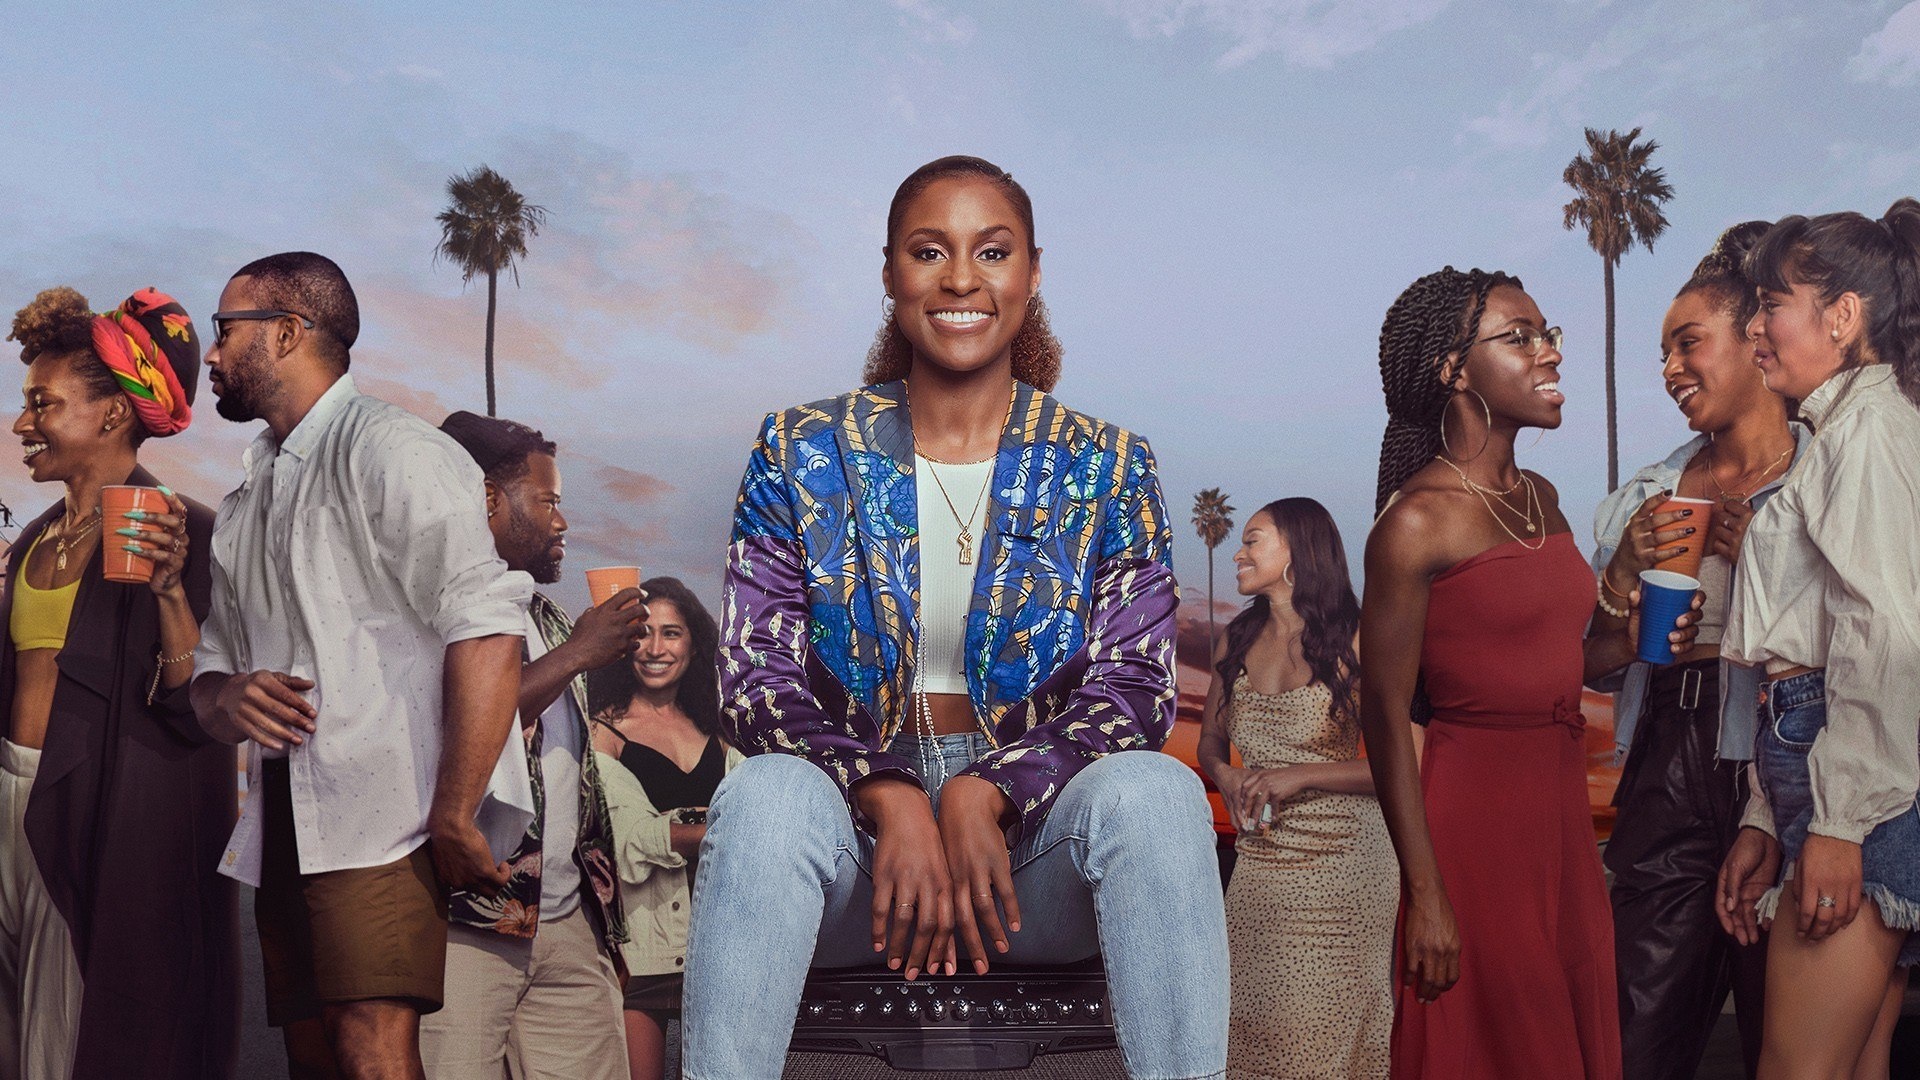 Insecure season 4 episodes, Unexpected twists, Black nerd problems, Self-discovery, 1920x1080 Full HD Desktop